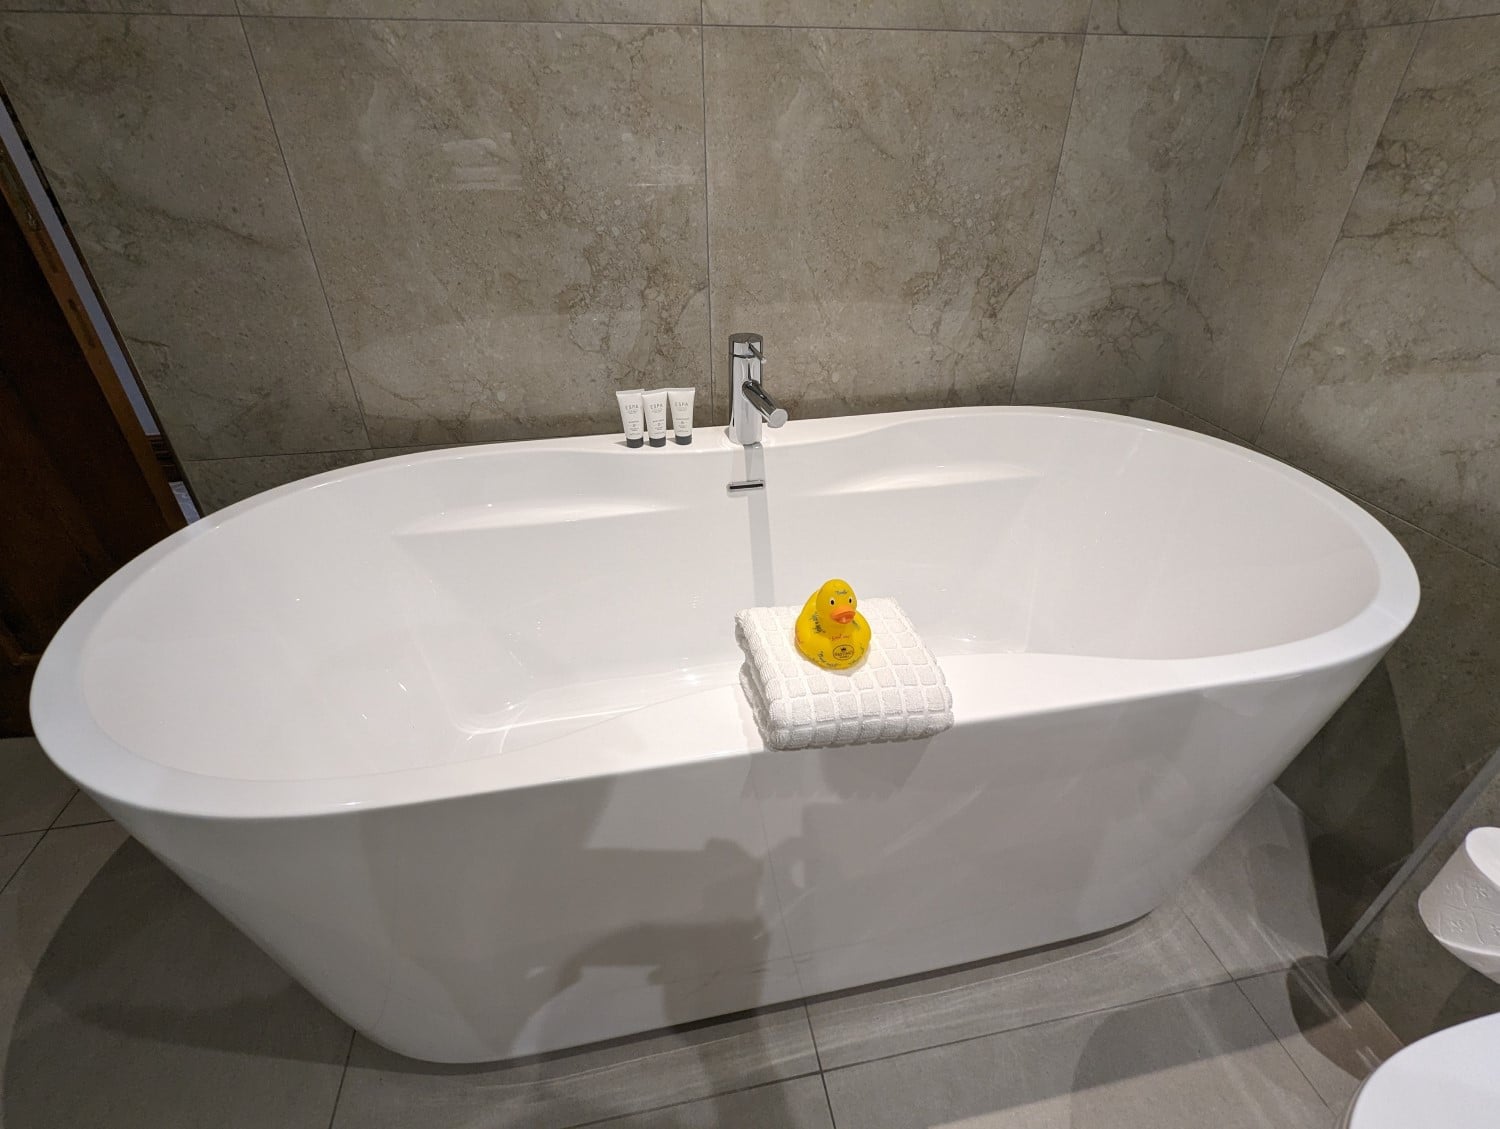 culloden estate and spa deluxe king room bathtub